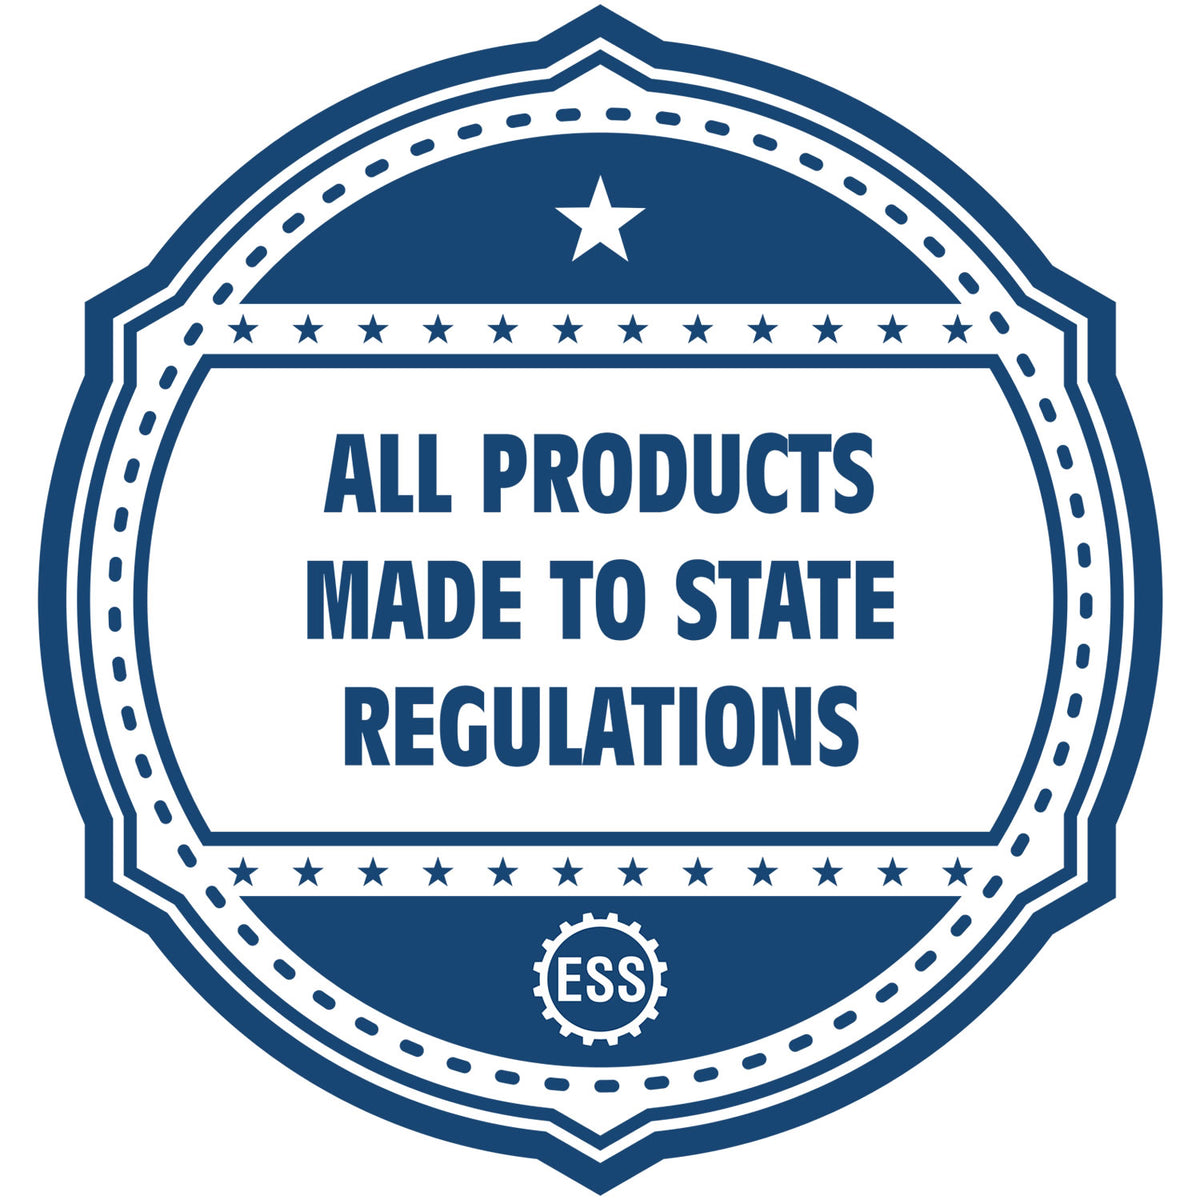 An icon or badge element for the Slim Pre-Inked Arkansas Landscape Architect Seal Stamp showing that this product is made in compliance with state regulations.